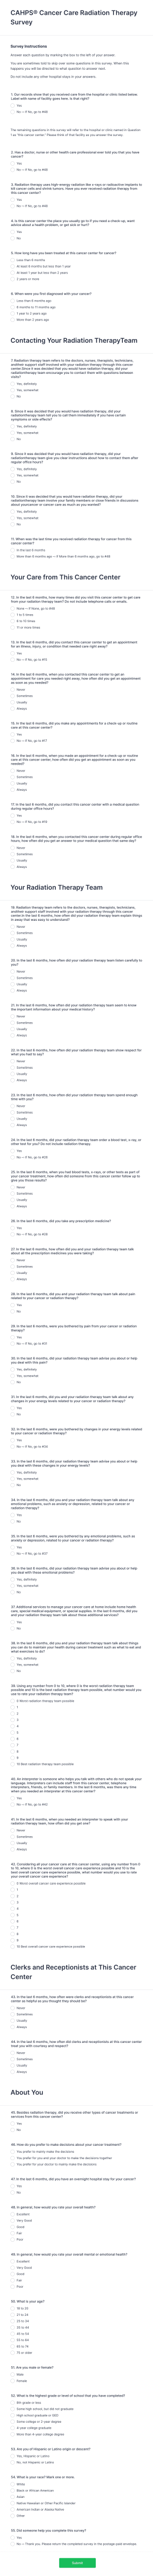 CAHPS Cancer Care Radiation Therapy Survey Form Template